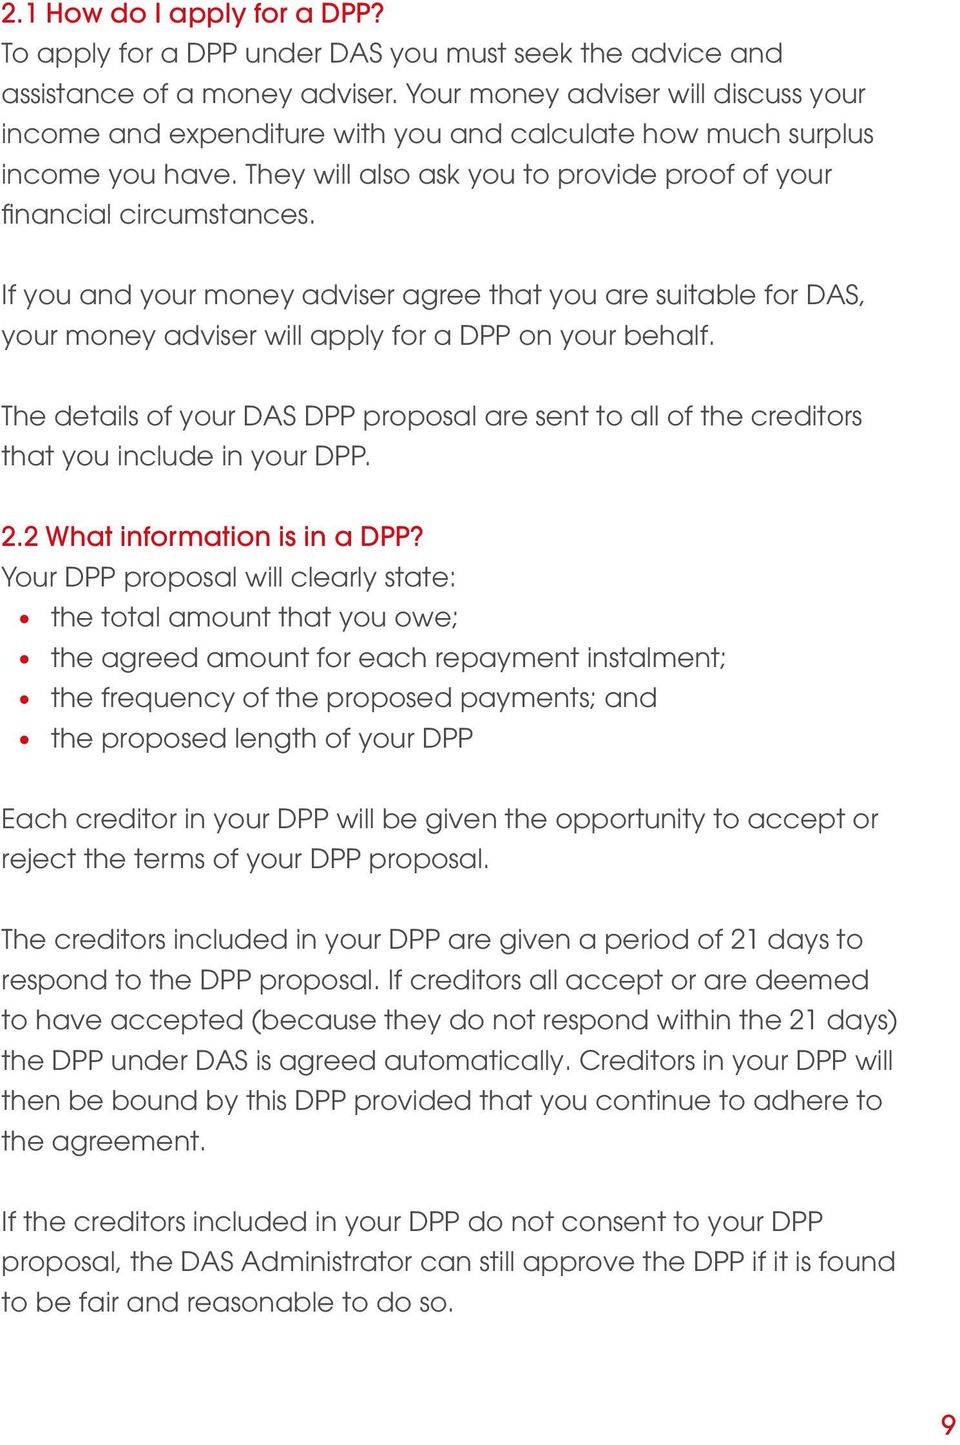 If you and your money adviser agree that you are suitable for DAS, your money adviser will apply for a DPP on your behalf.